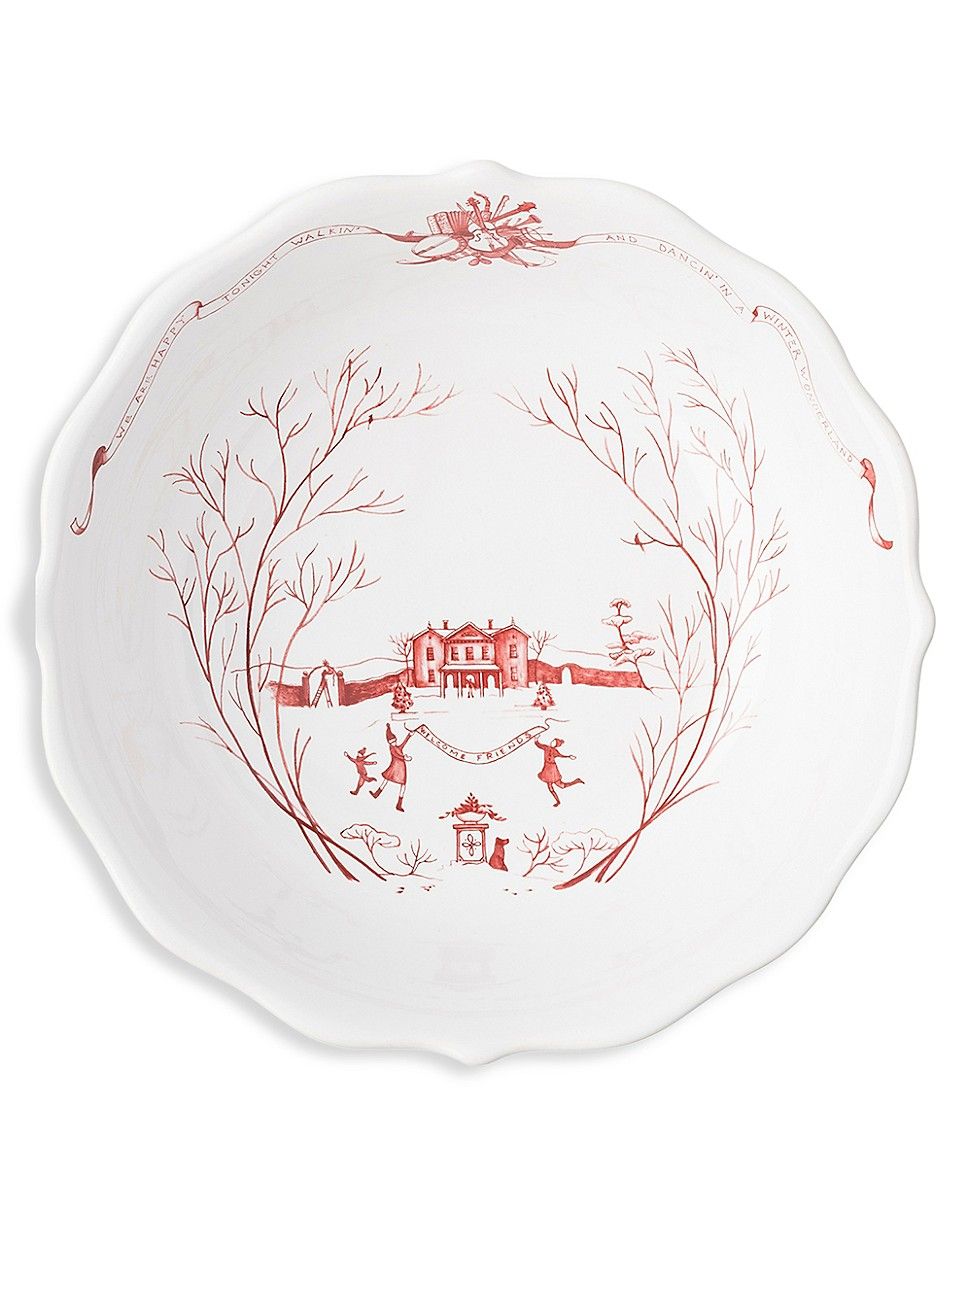 Country Estate Winter Frolic Serving Bowl | Saks Fifth Avenue